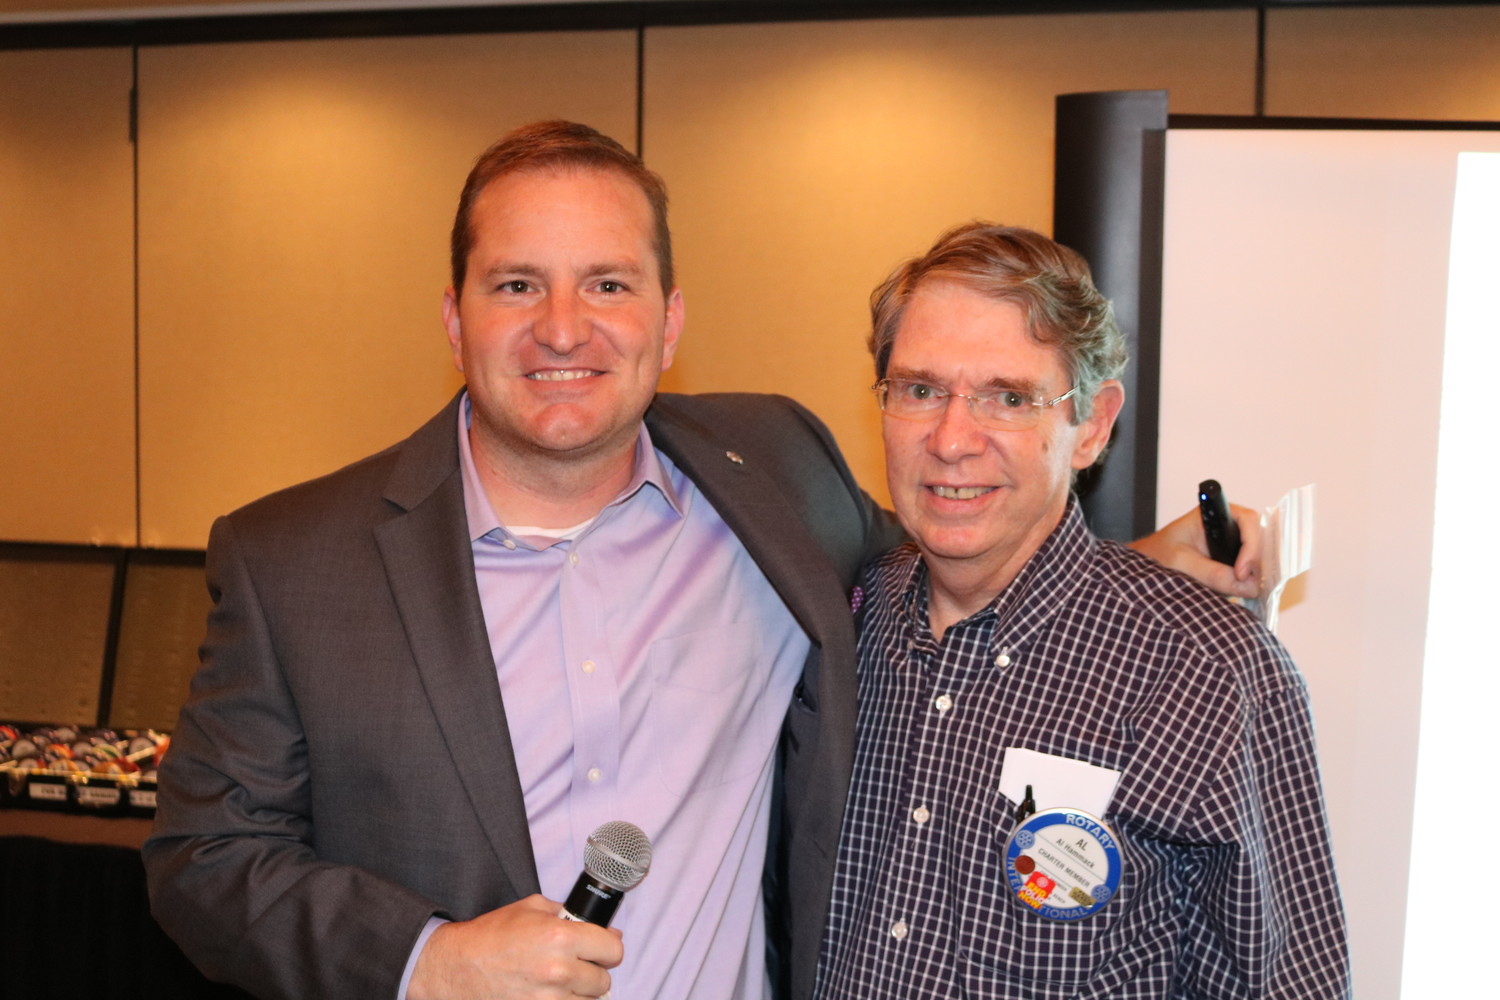 Al Hammack (right) poses with Rotary Club of Ponte Vedra Beach President Billy Wagner after being named Rotarian of the Month at a recent club meeting.